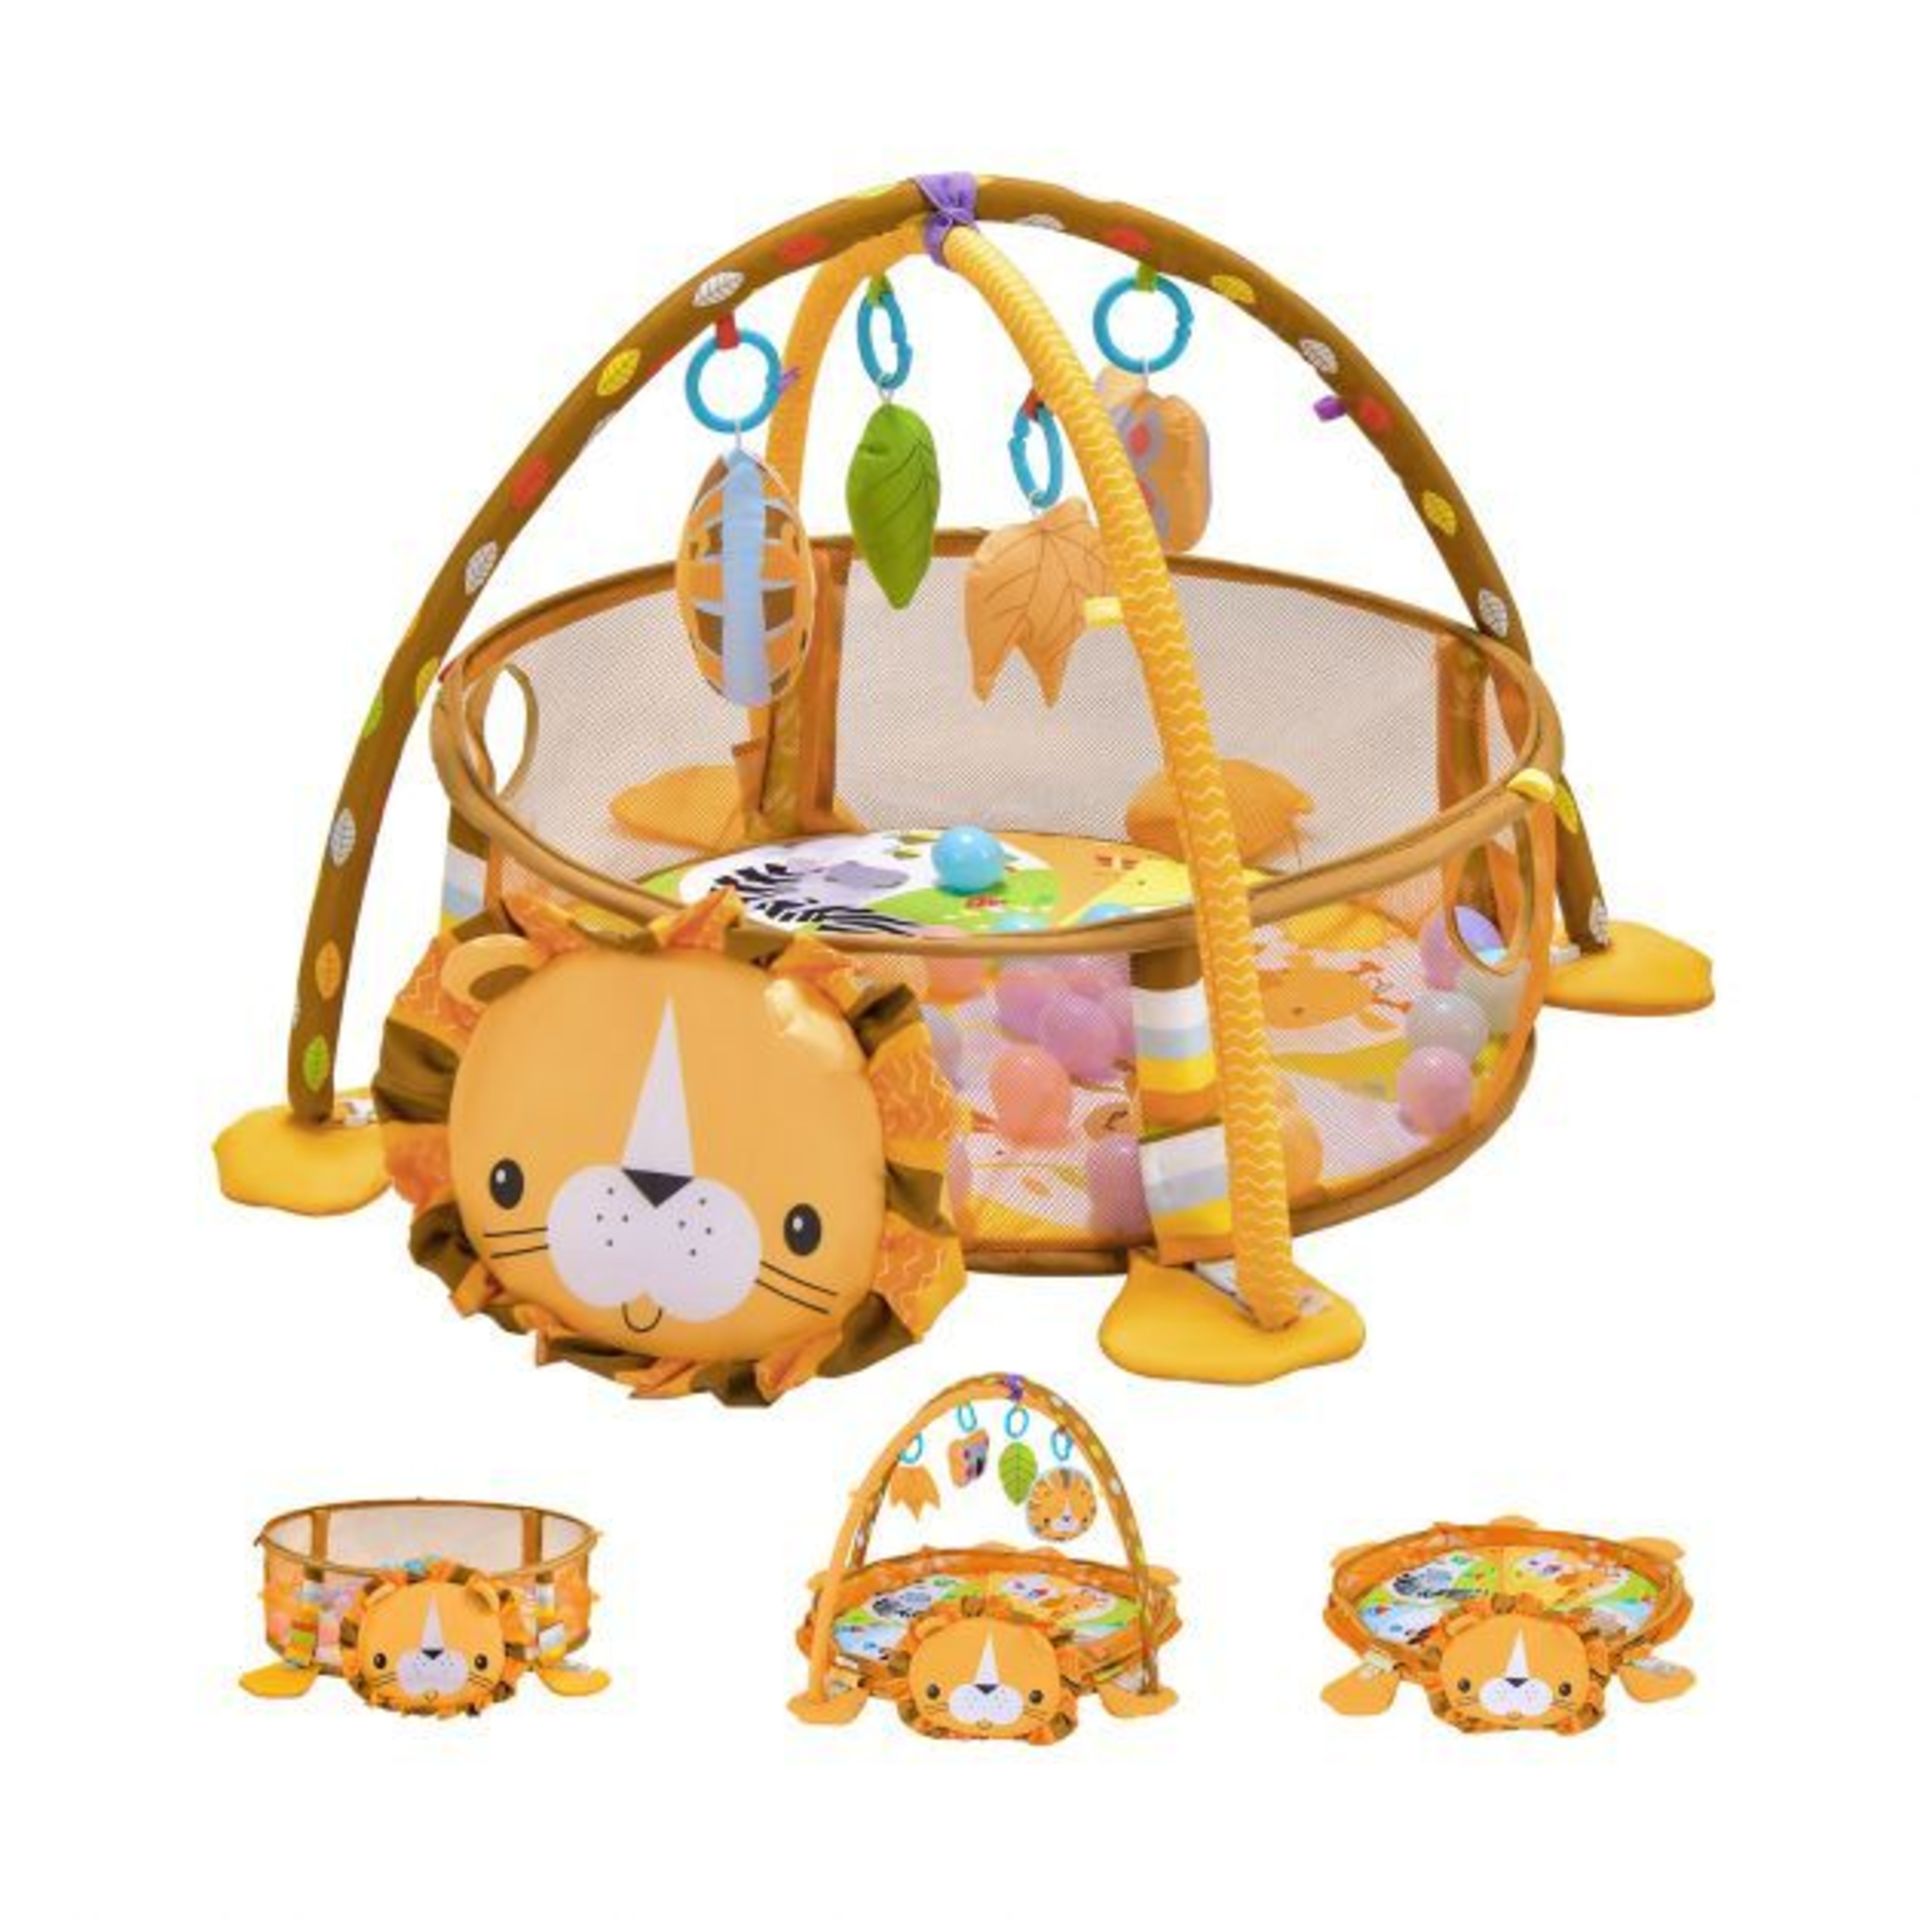 4-in-1 Baby Play Gym with Soft Padding Mat and Arch Design. - R14.1